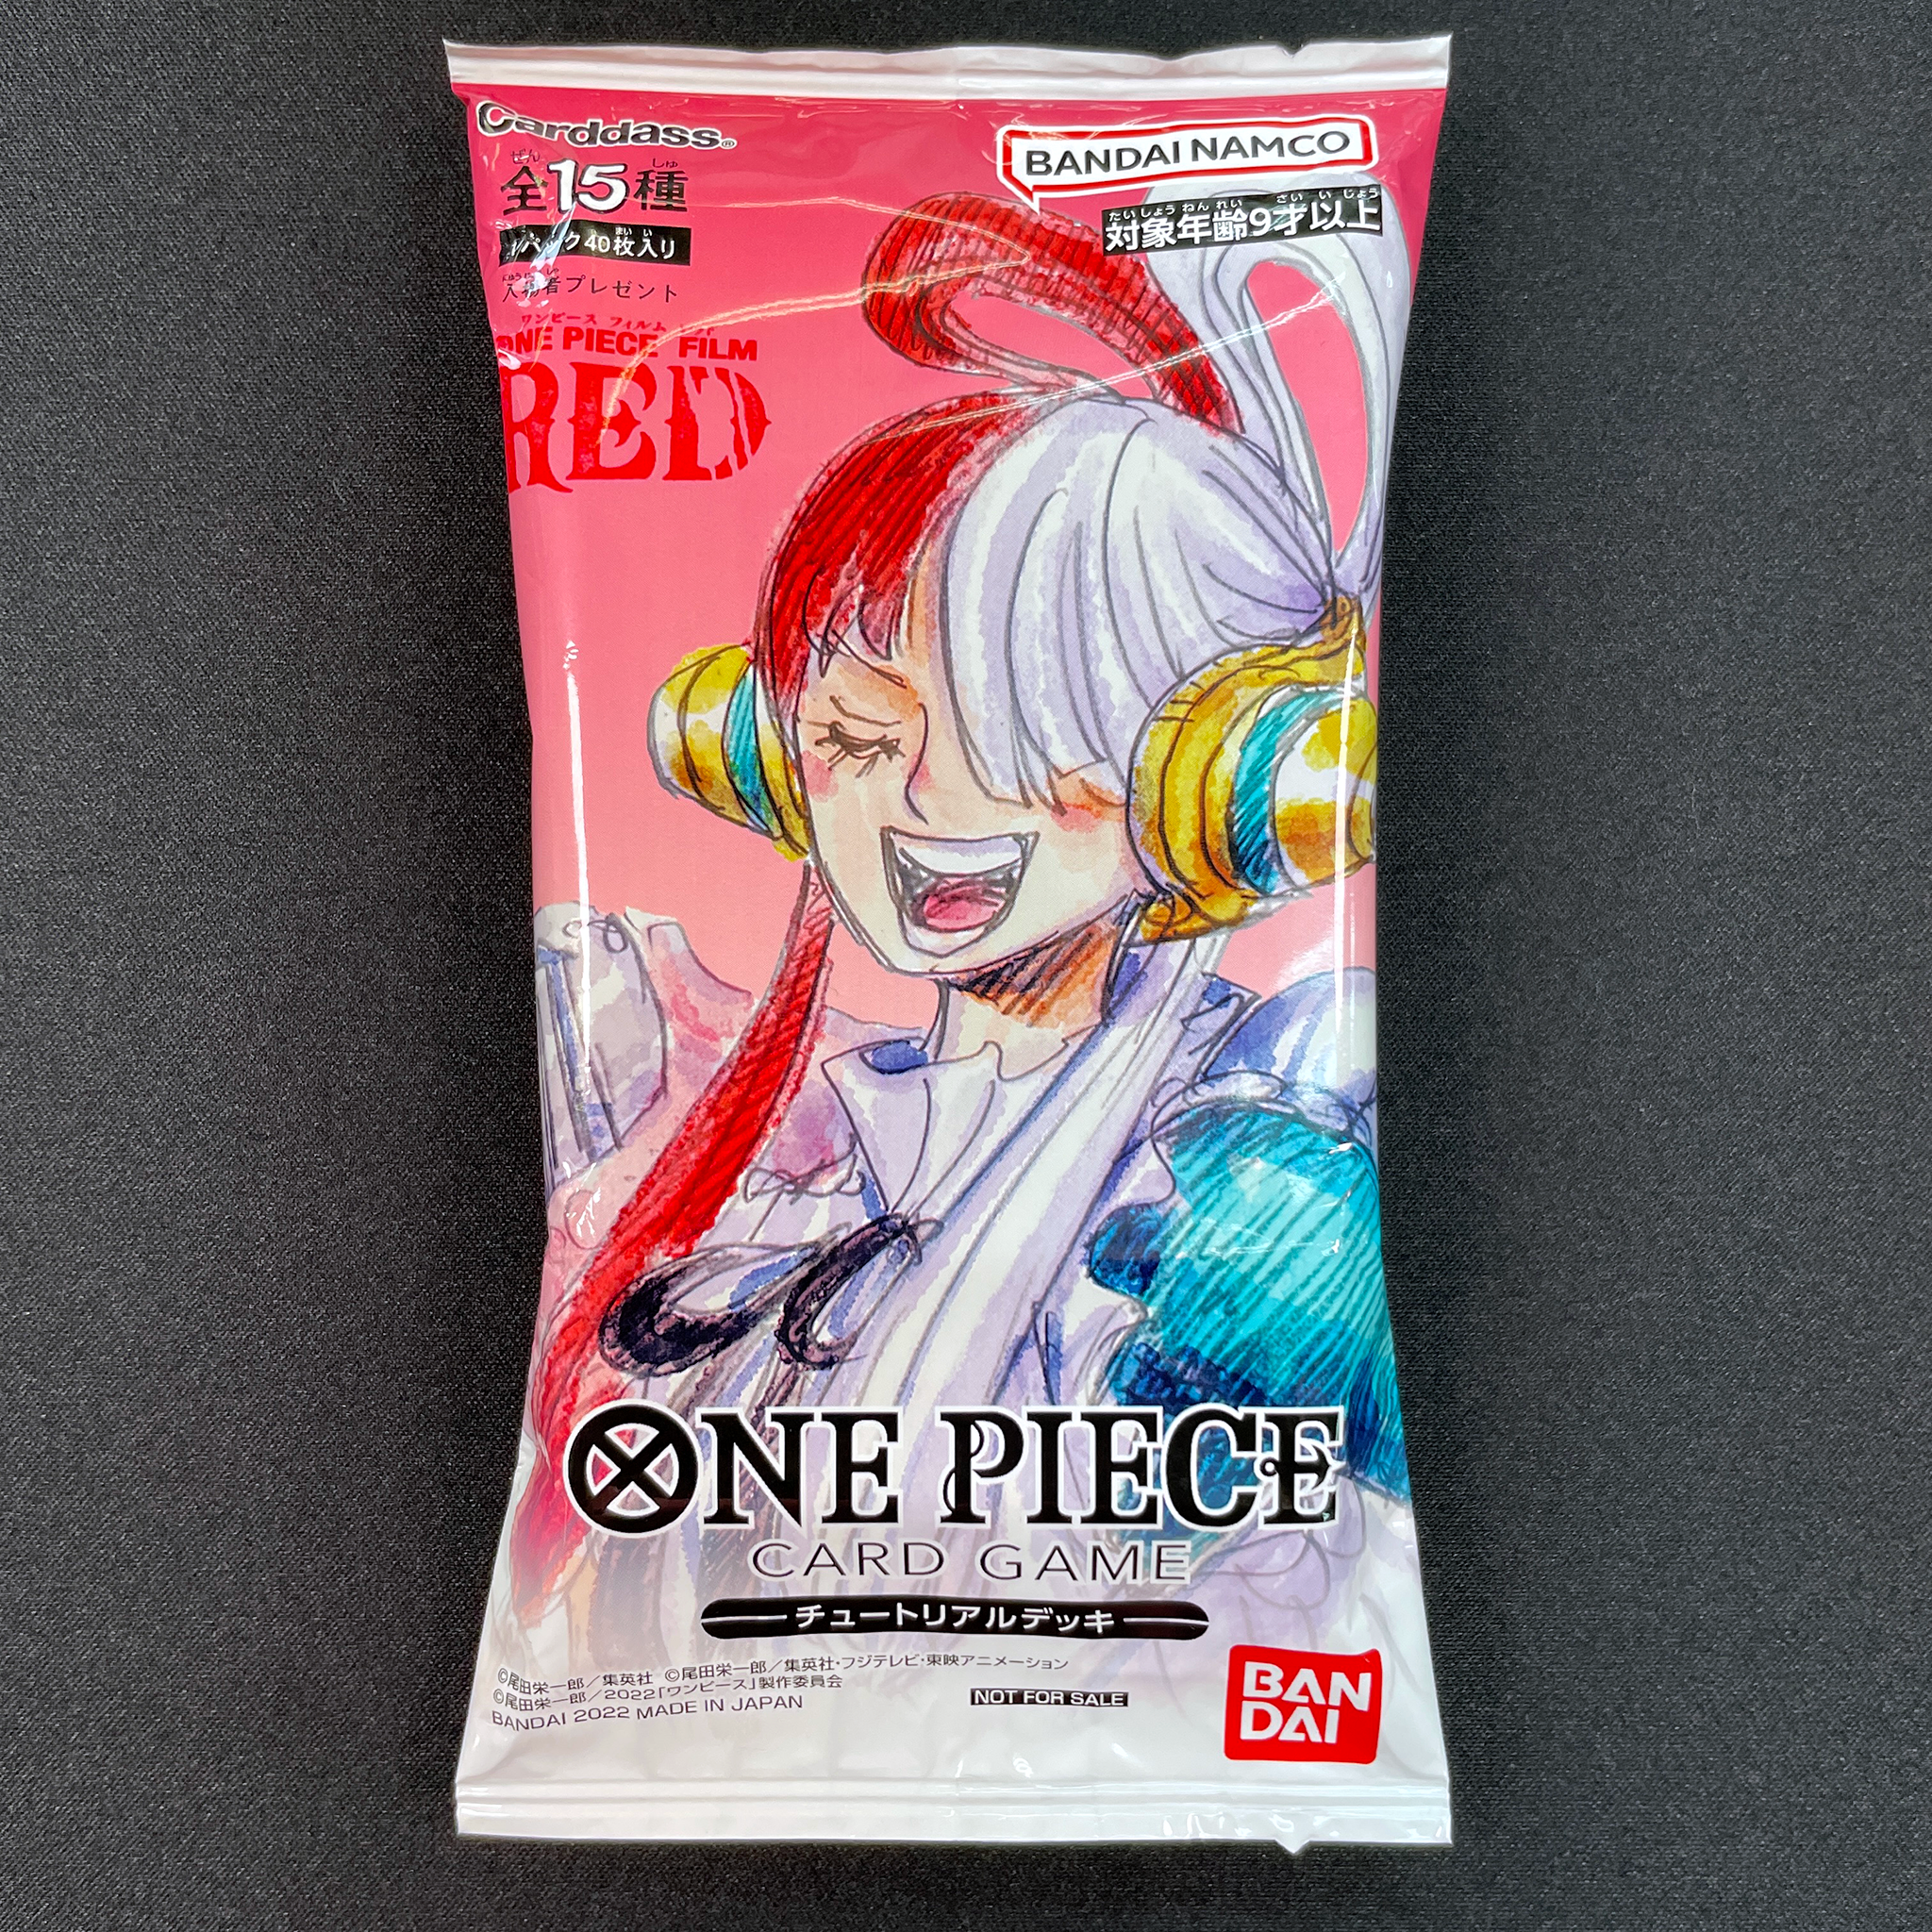 ONE PIECE CARD GAME TUTORIAL DECK  Release date: August 13 2022  Distributed in theaters for the purchase of a cinema ticket for the film ONE PIECE RED. All blister packages are distributed folded.  Limited to 500,000 copies  Contain 40 promotional cards for a total of 14 kinds of differents cards